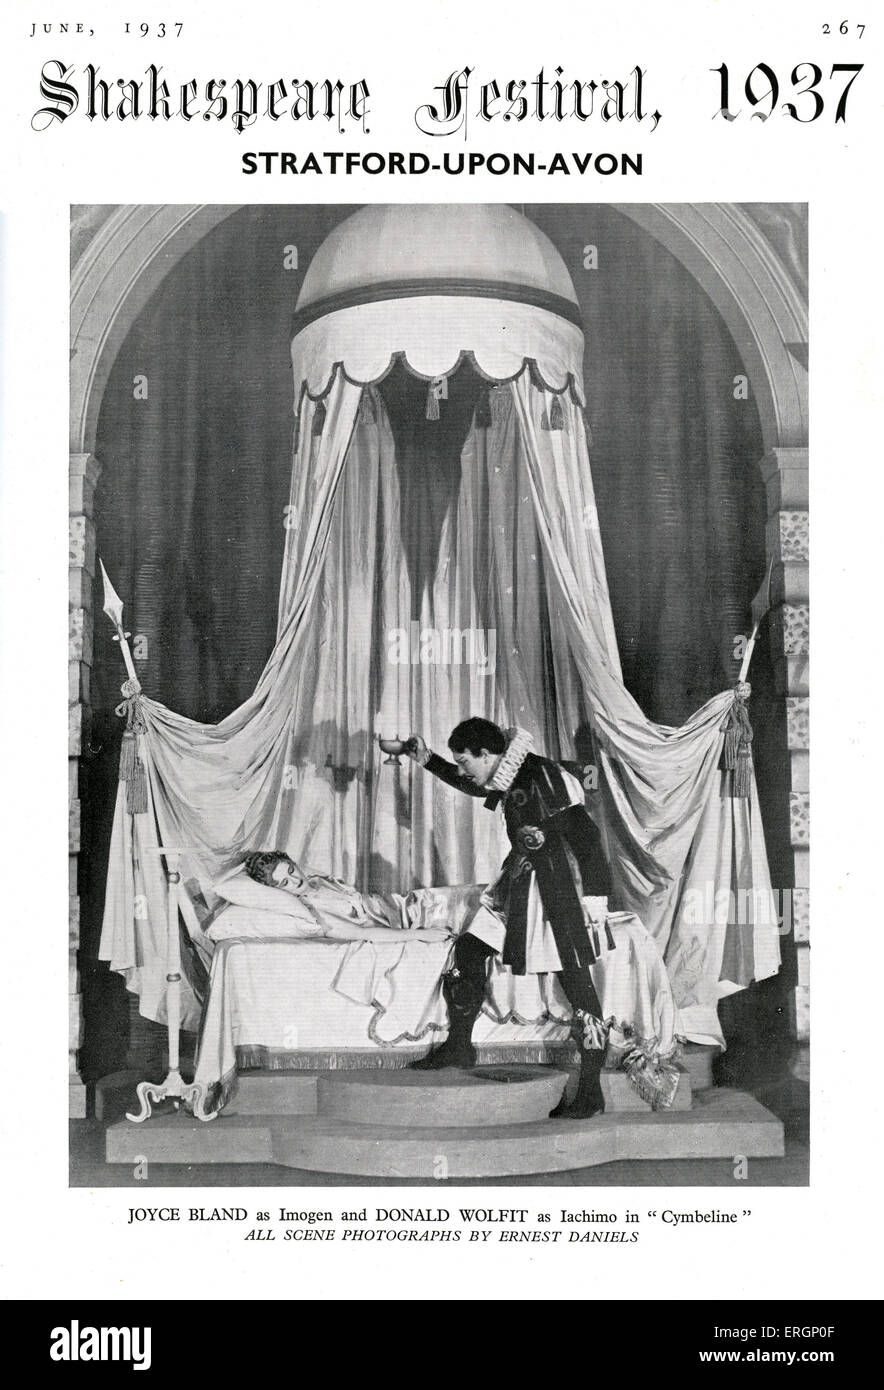 Joyce Bland as Imogen and Donald Wolfitt as Iachimo in William Shakespeare 's 'Cymbeline'. Performed at the Shakespeare Memorial Festiva in Stratford-Upon-Avon in 1937. . J.B. 10 May 1906 – 24 August 1963.- D.W. 20 April 1902 – 17 February 1968 Stock Photo